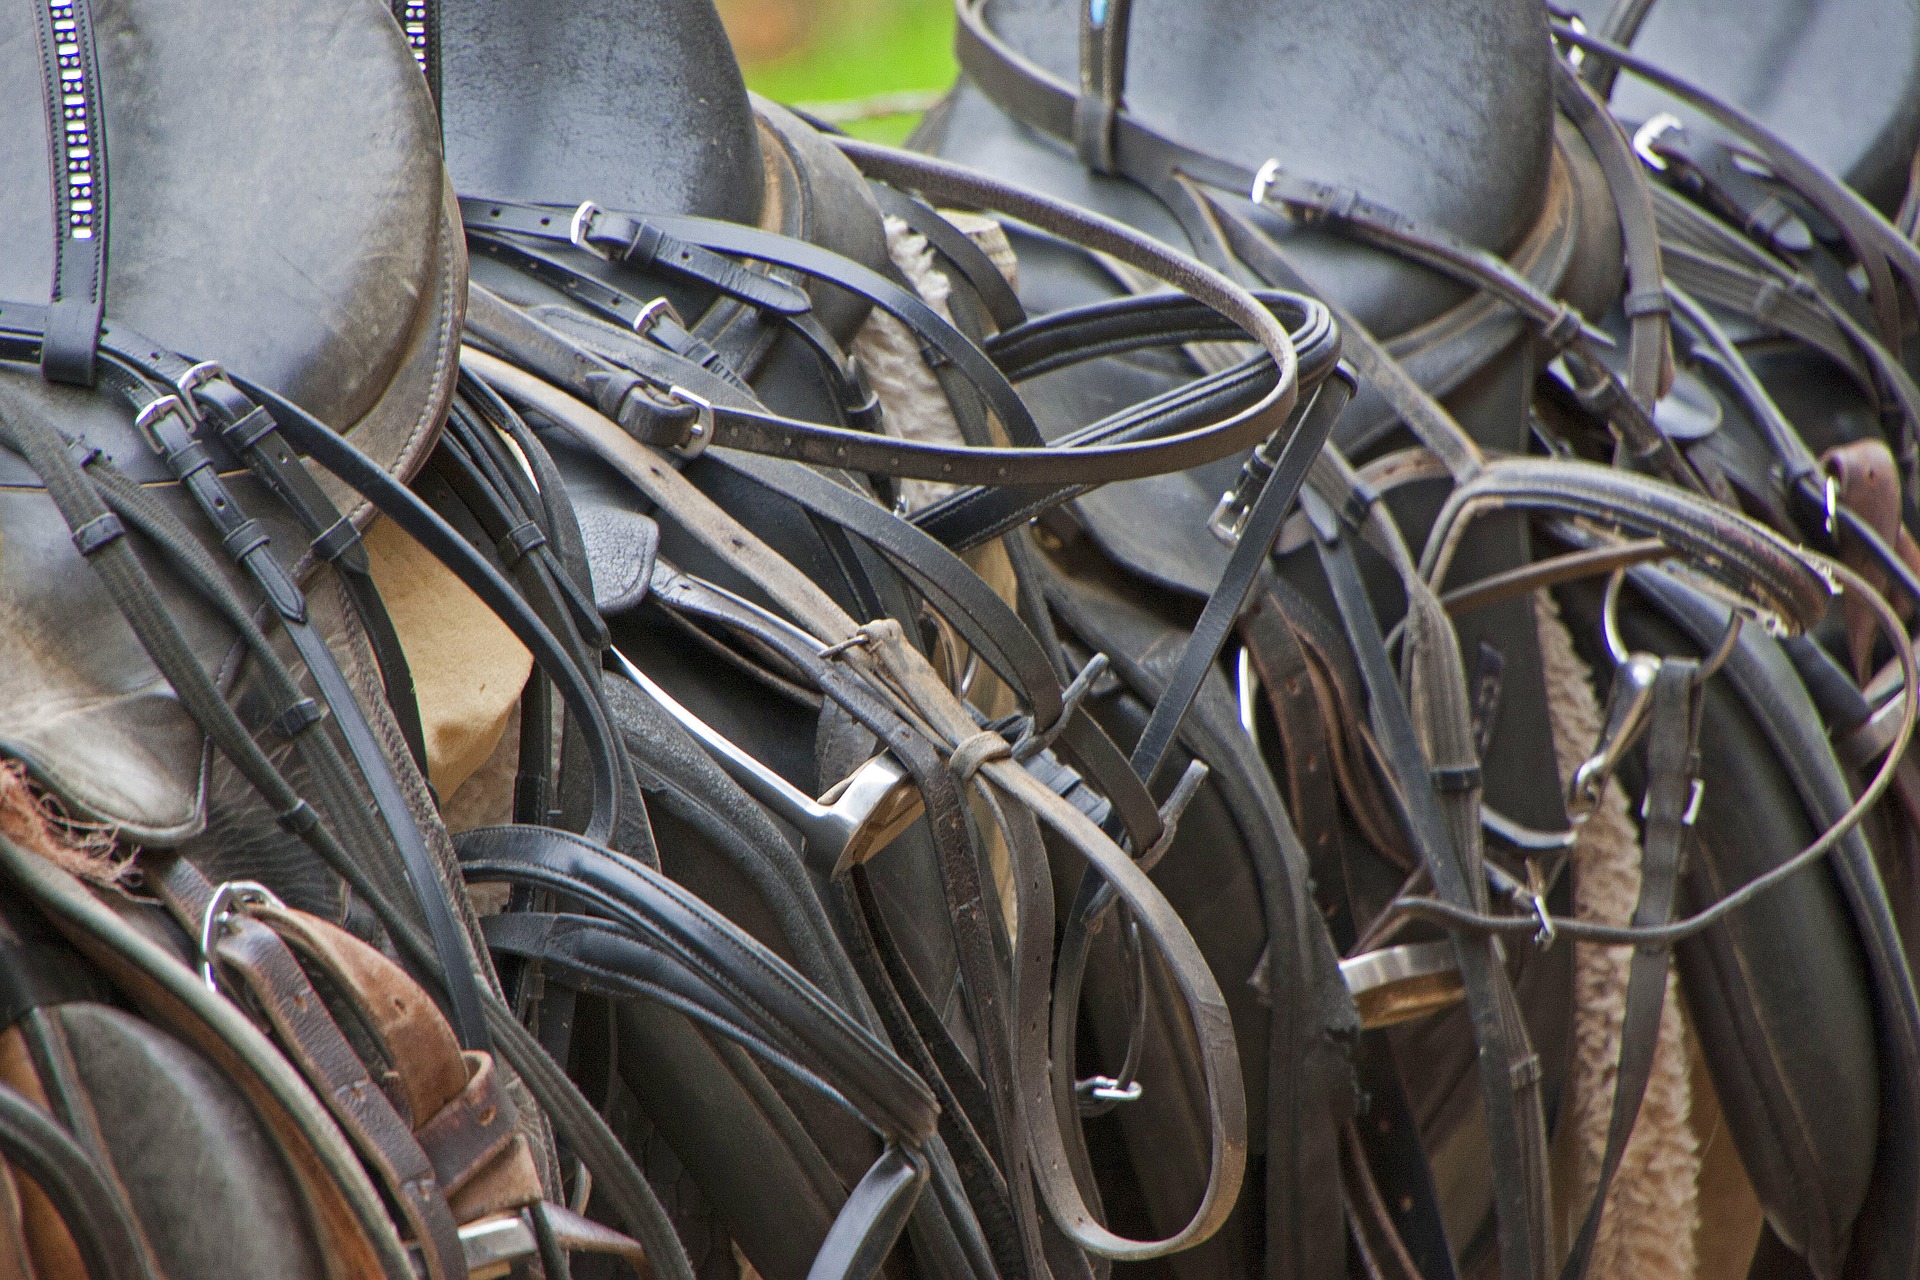 Horse tack and equipment